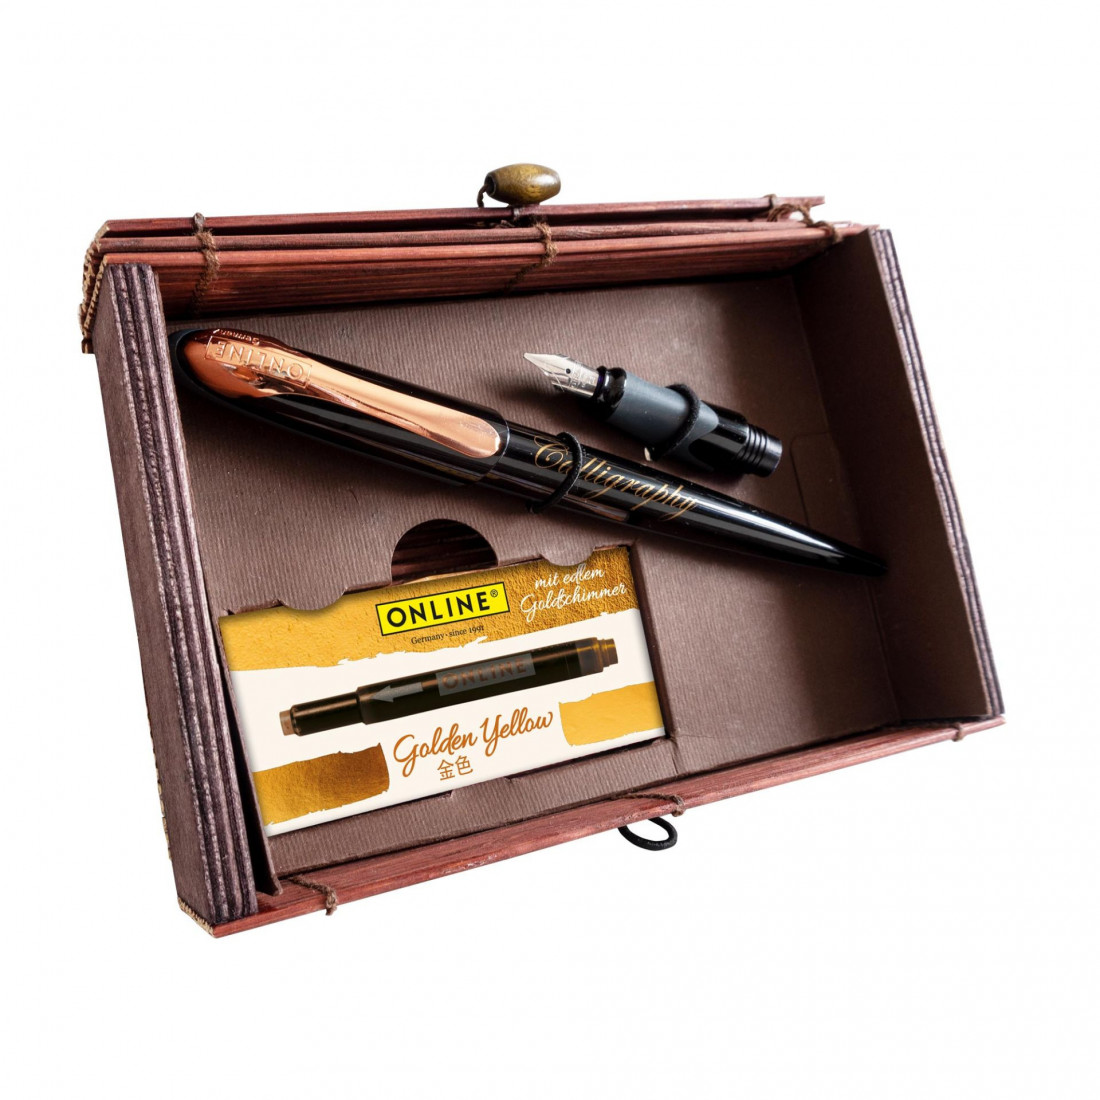 ONLINE Calligraphy Set in Bamboo Case Air Best Writer Black Rose 10058